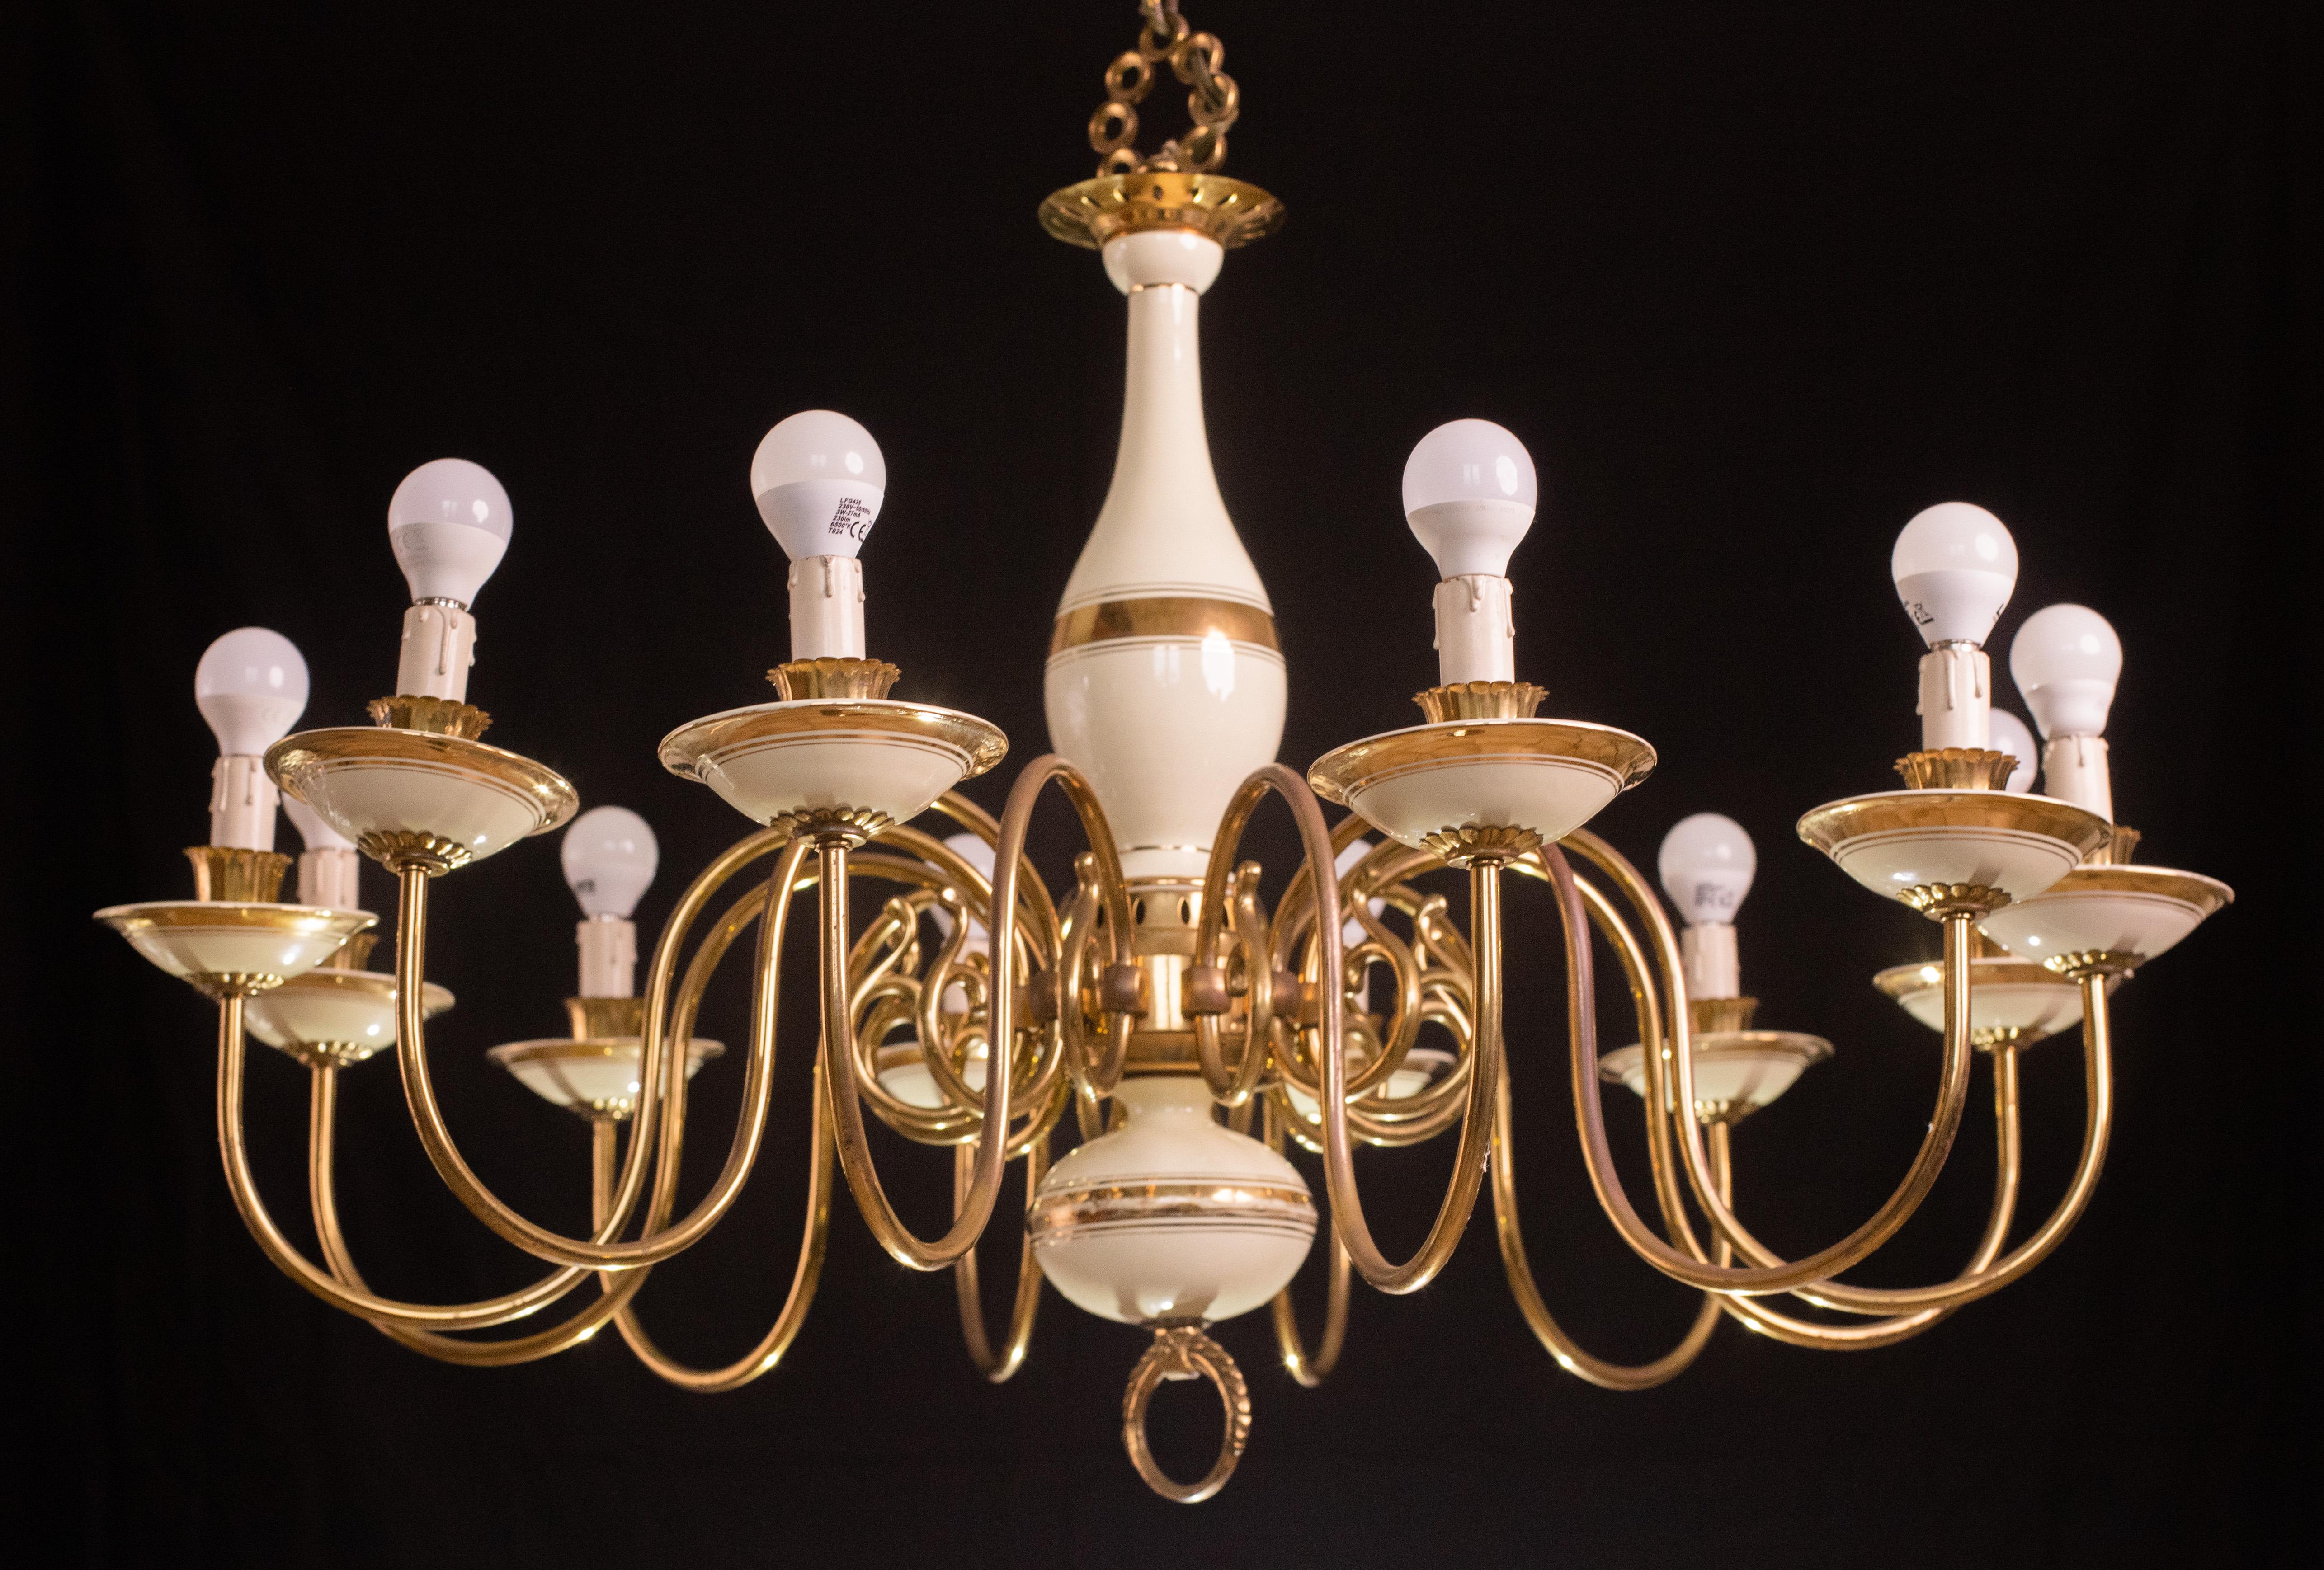 Gorgeous Art Deco chandelier in brass and painted terracotta.

The 12 light points mount a standard European socket and 14.